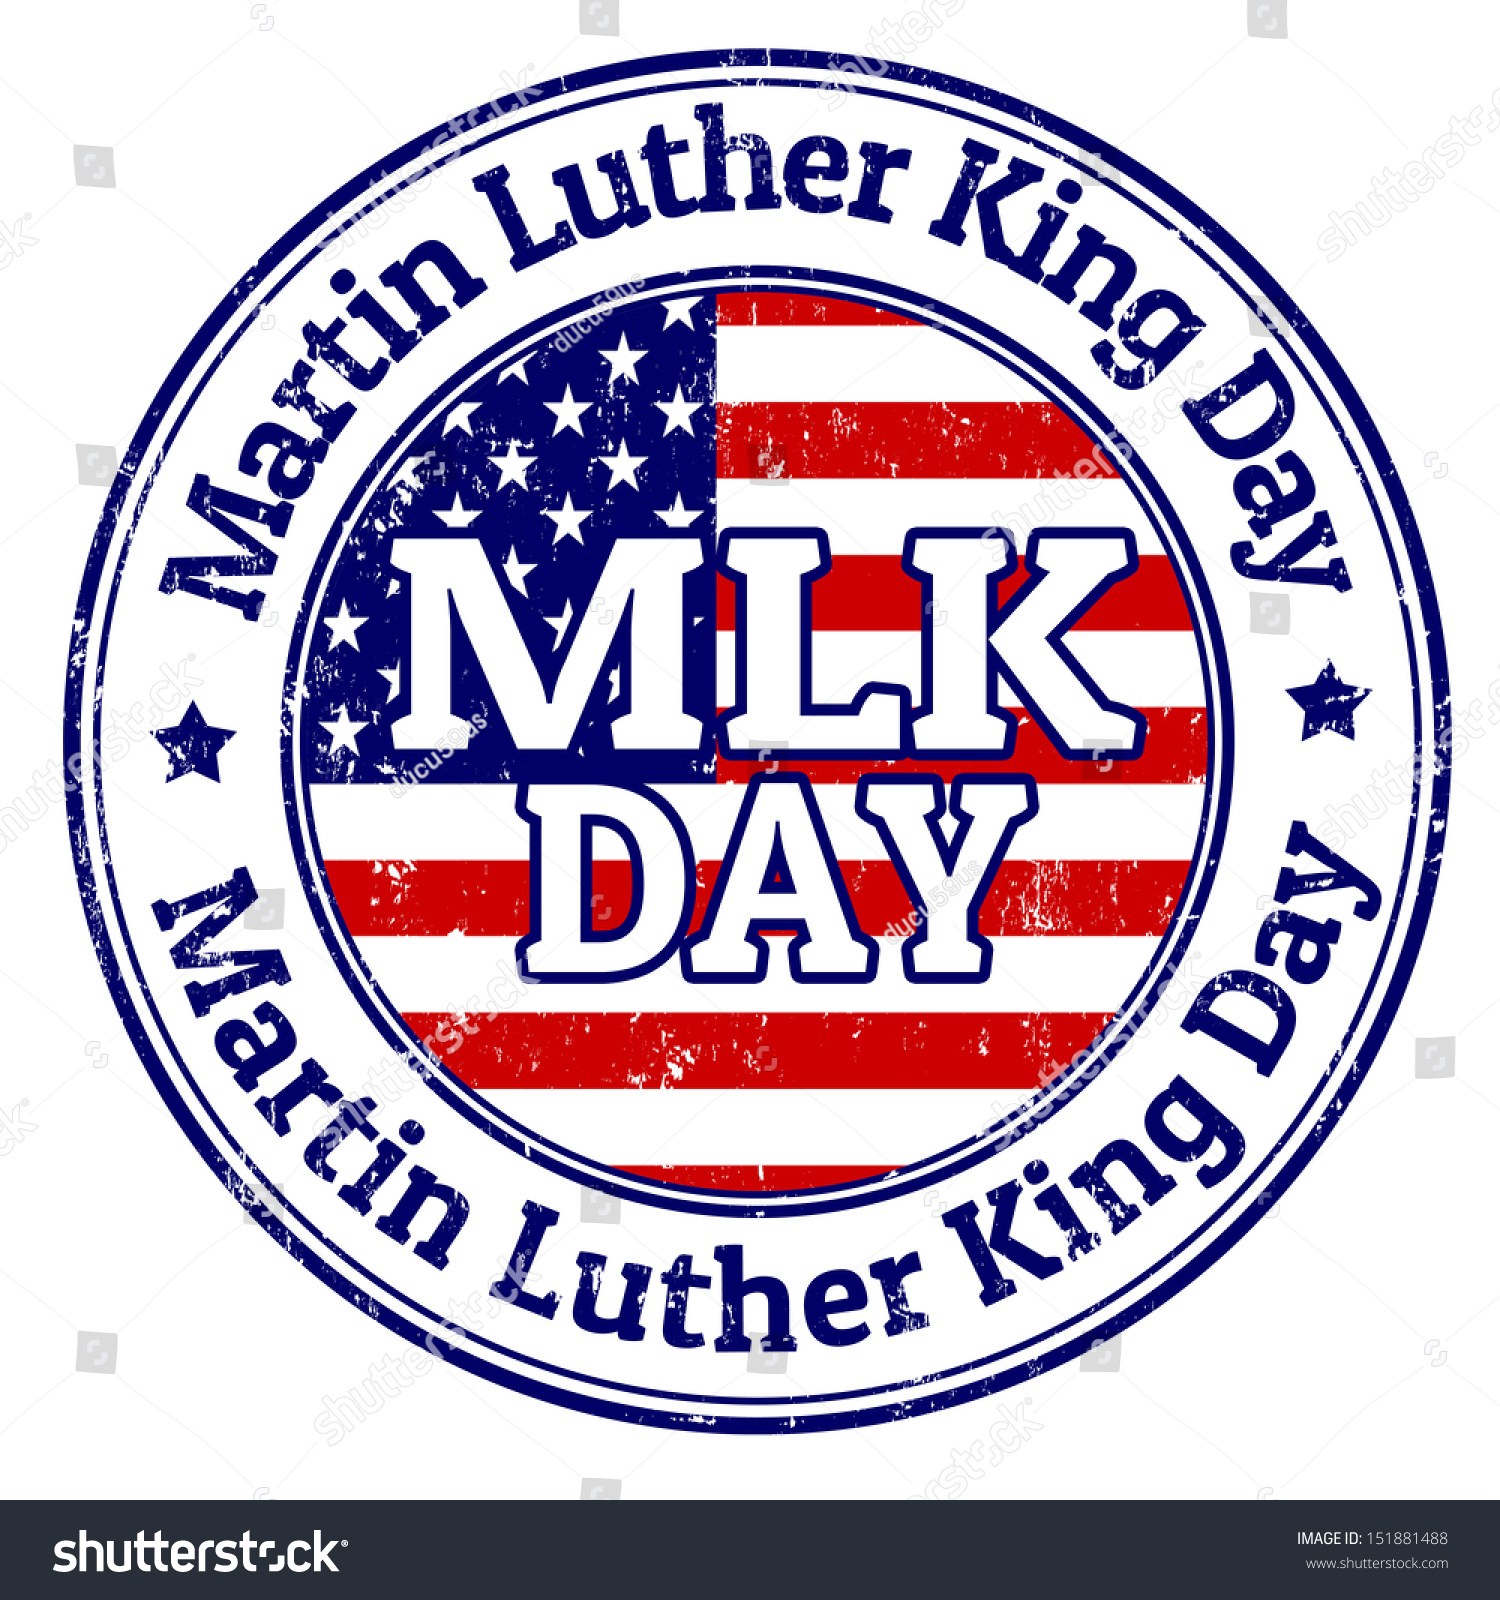 Martin Luther King Day Grunge Rubber Stock Vector 151881488 - Shutterstock1500 x 1600